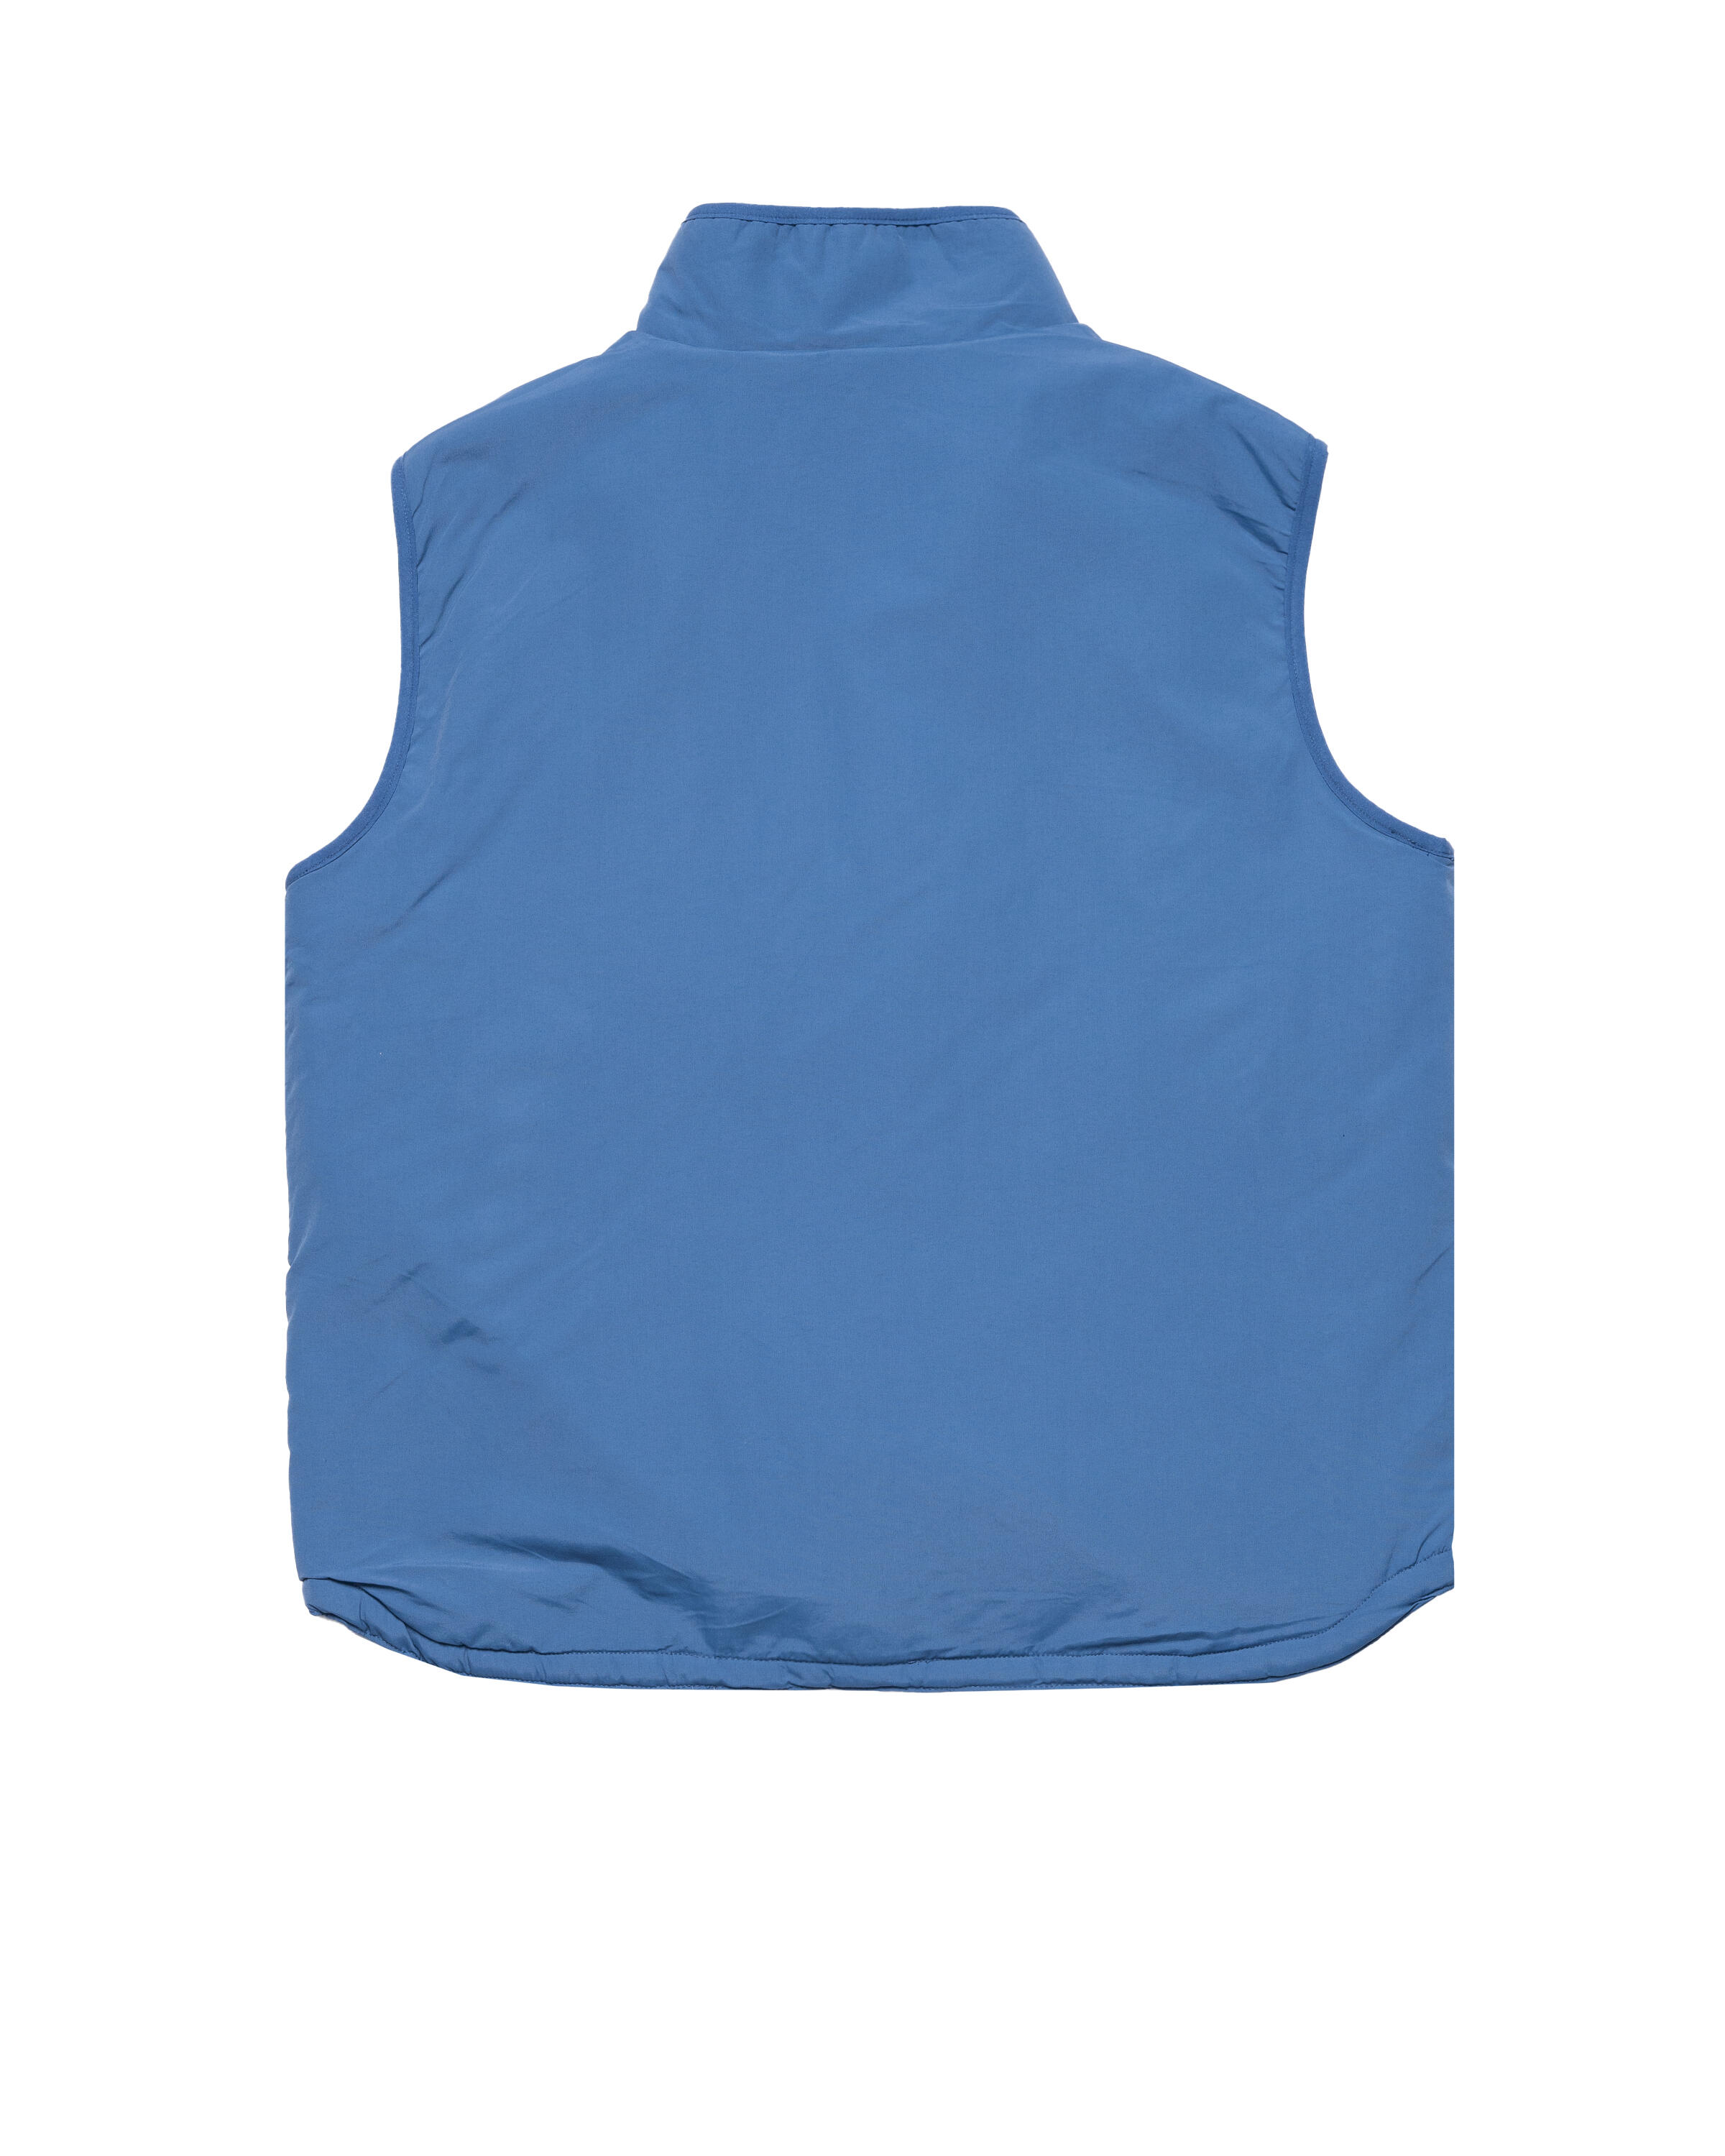 by Parra trees in wind reversible vest